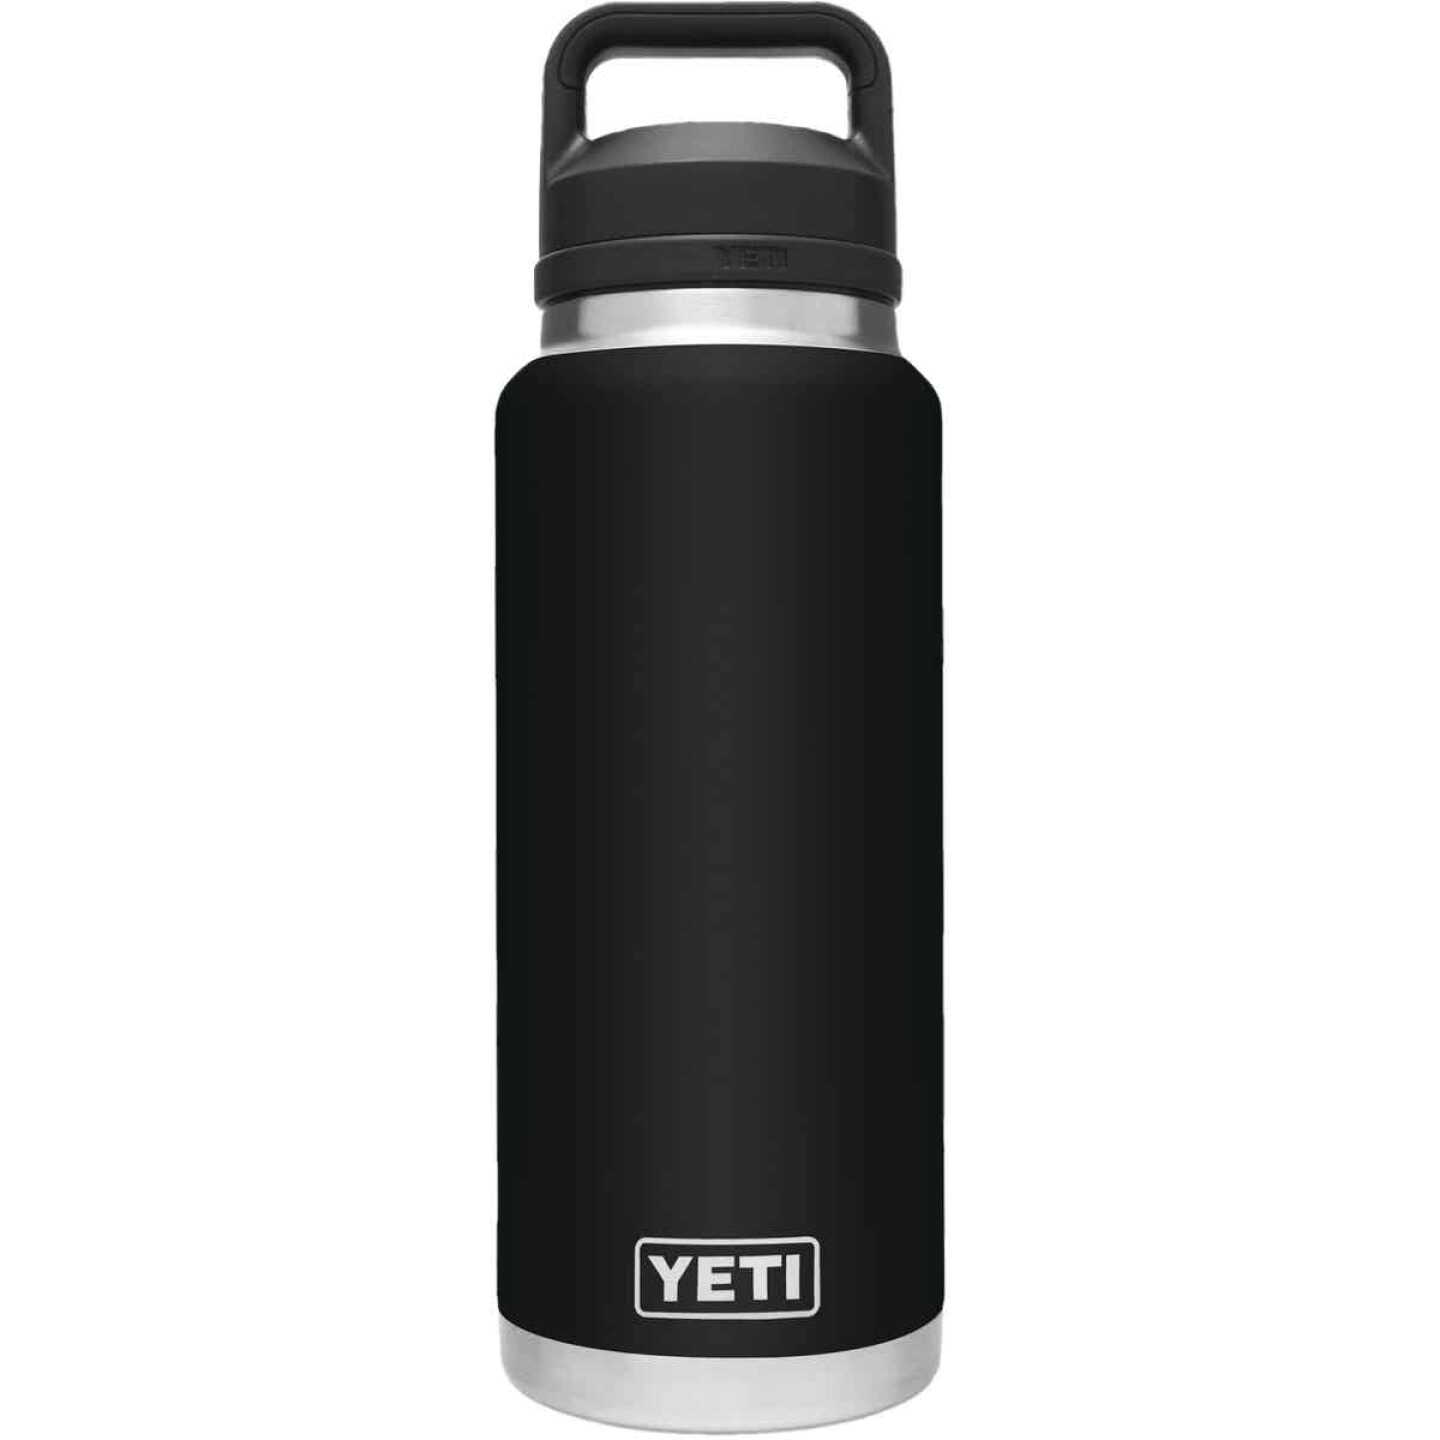 YETI Rambler 36 oz Bottle, Vacuum Insulated, Stainless Steel with